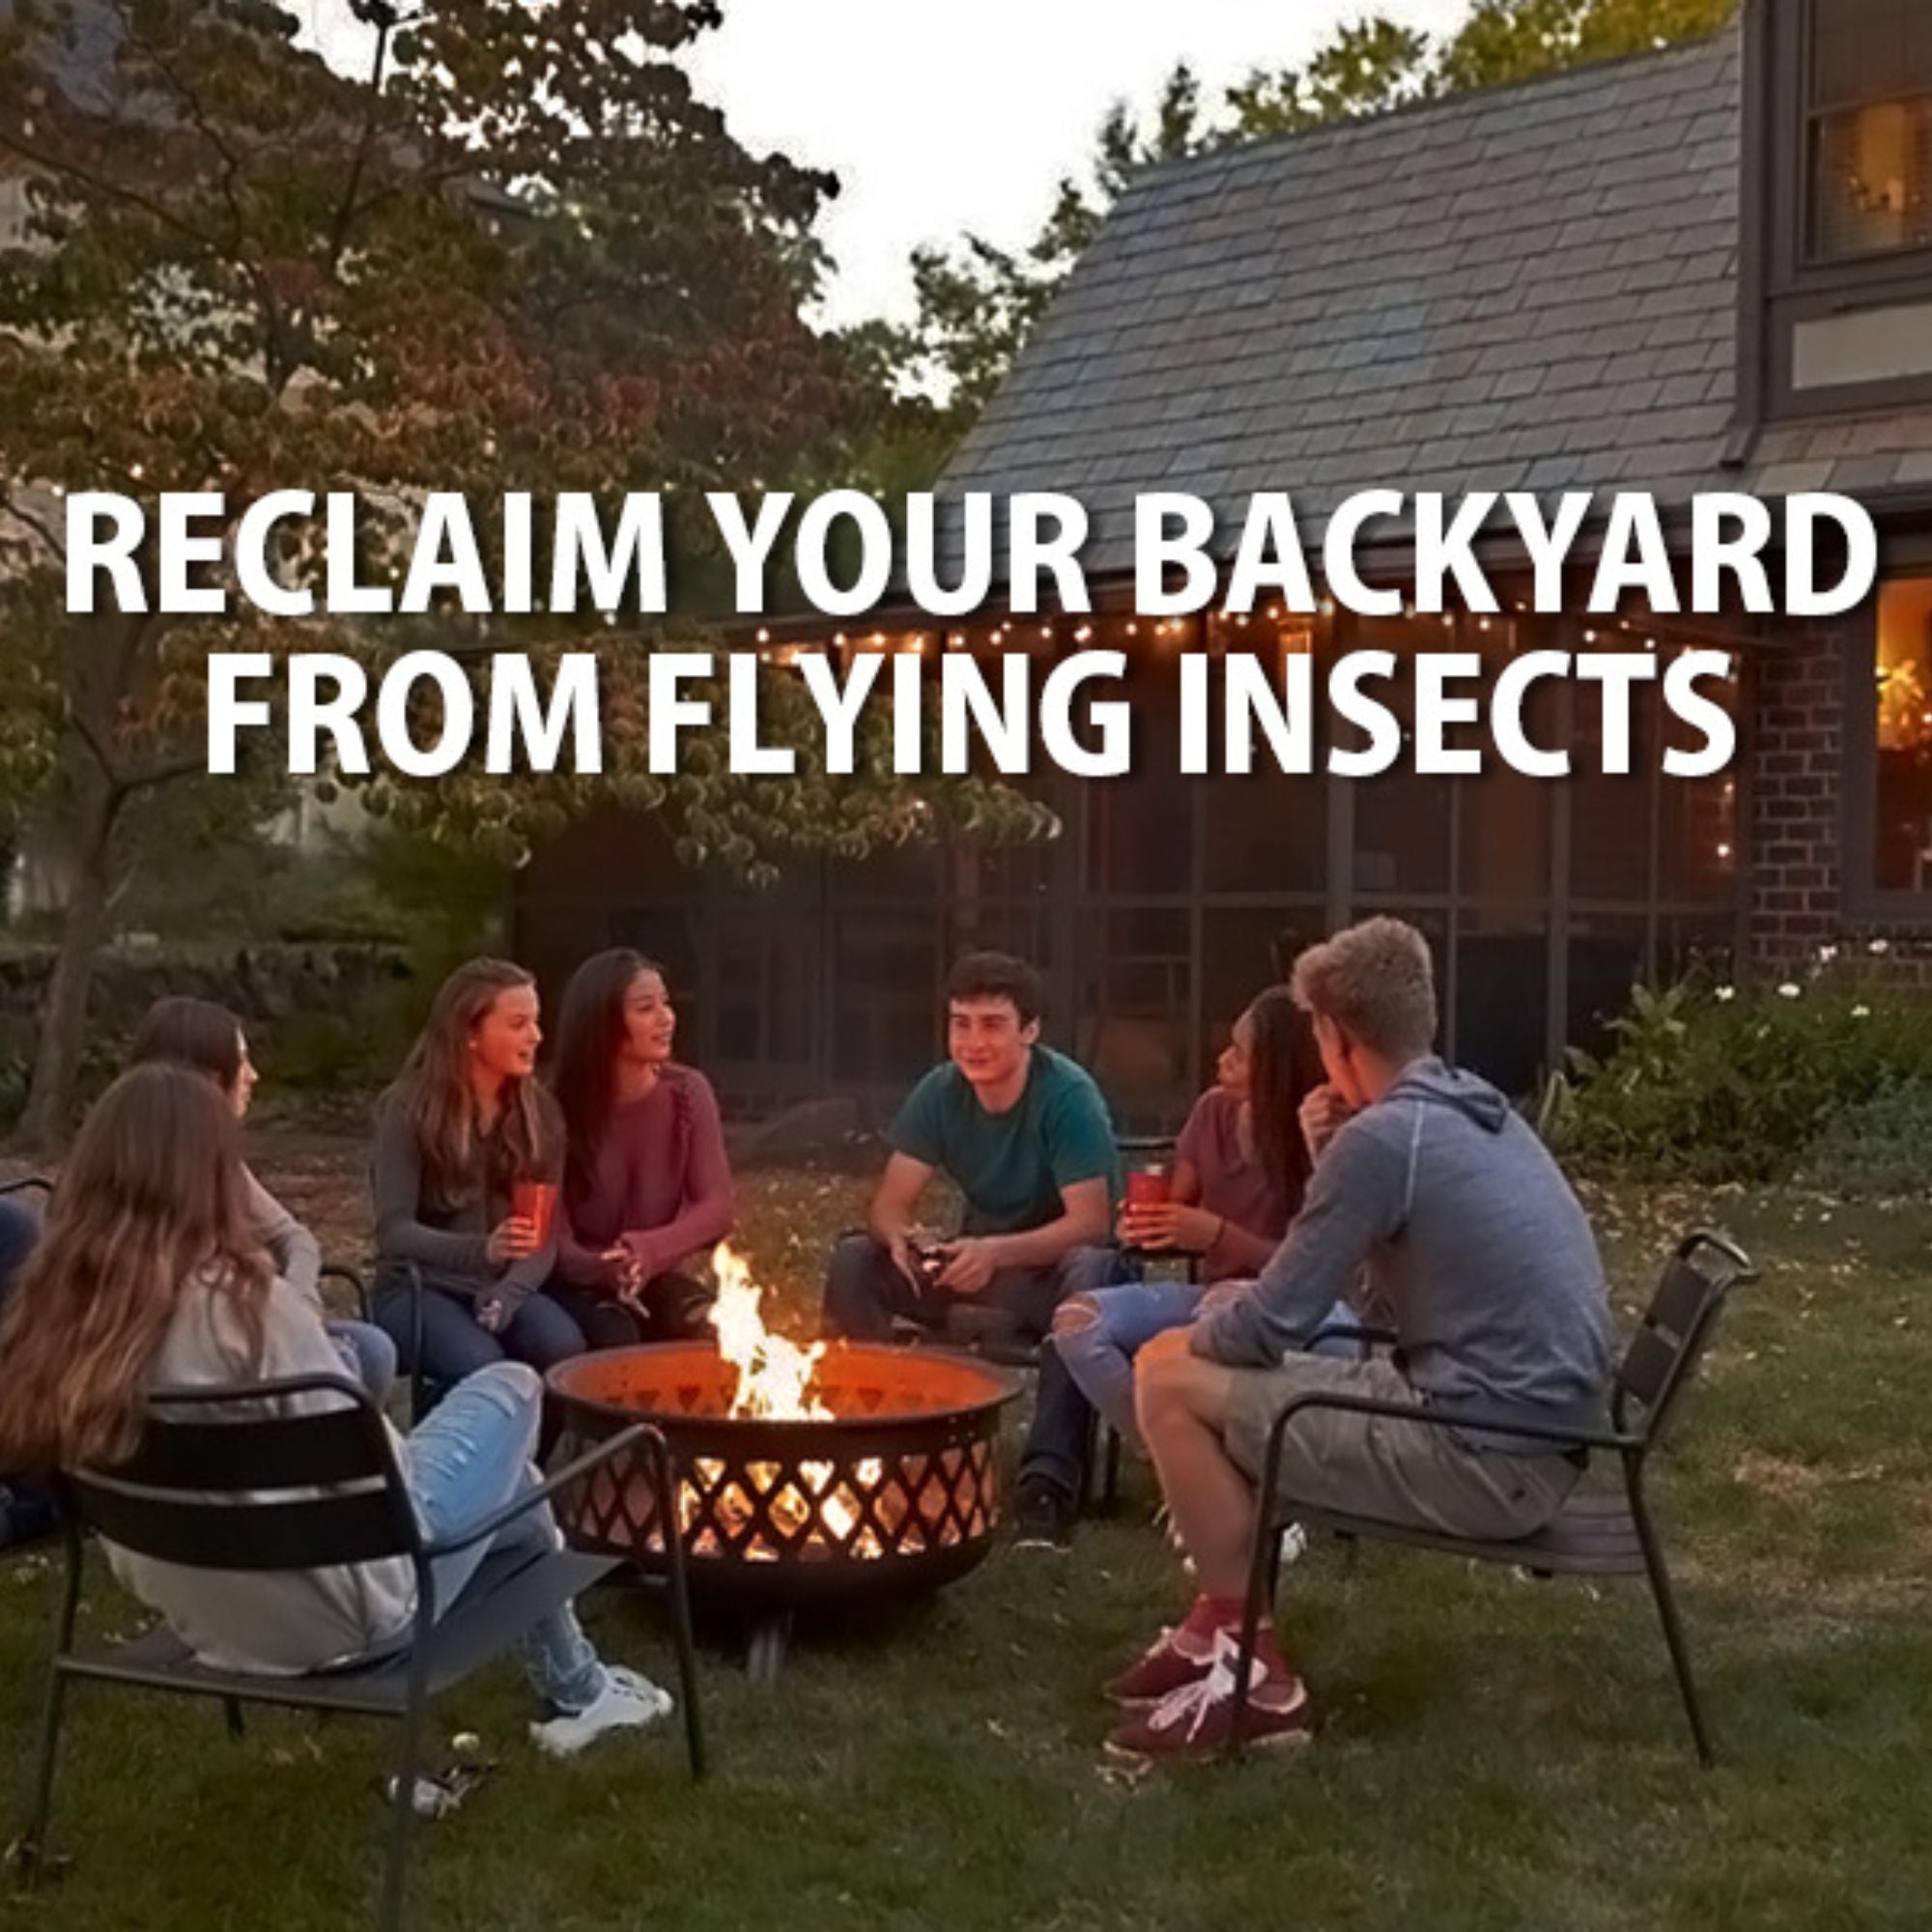 Several people sitting in chairs around an outdoor fire pit at dusk with text overlay reading, "Reclaim your backyard from flying insects"